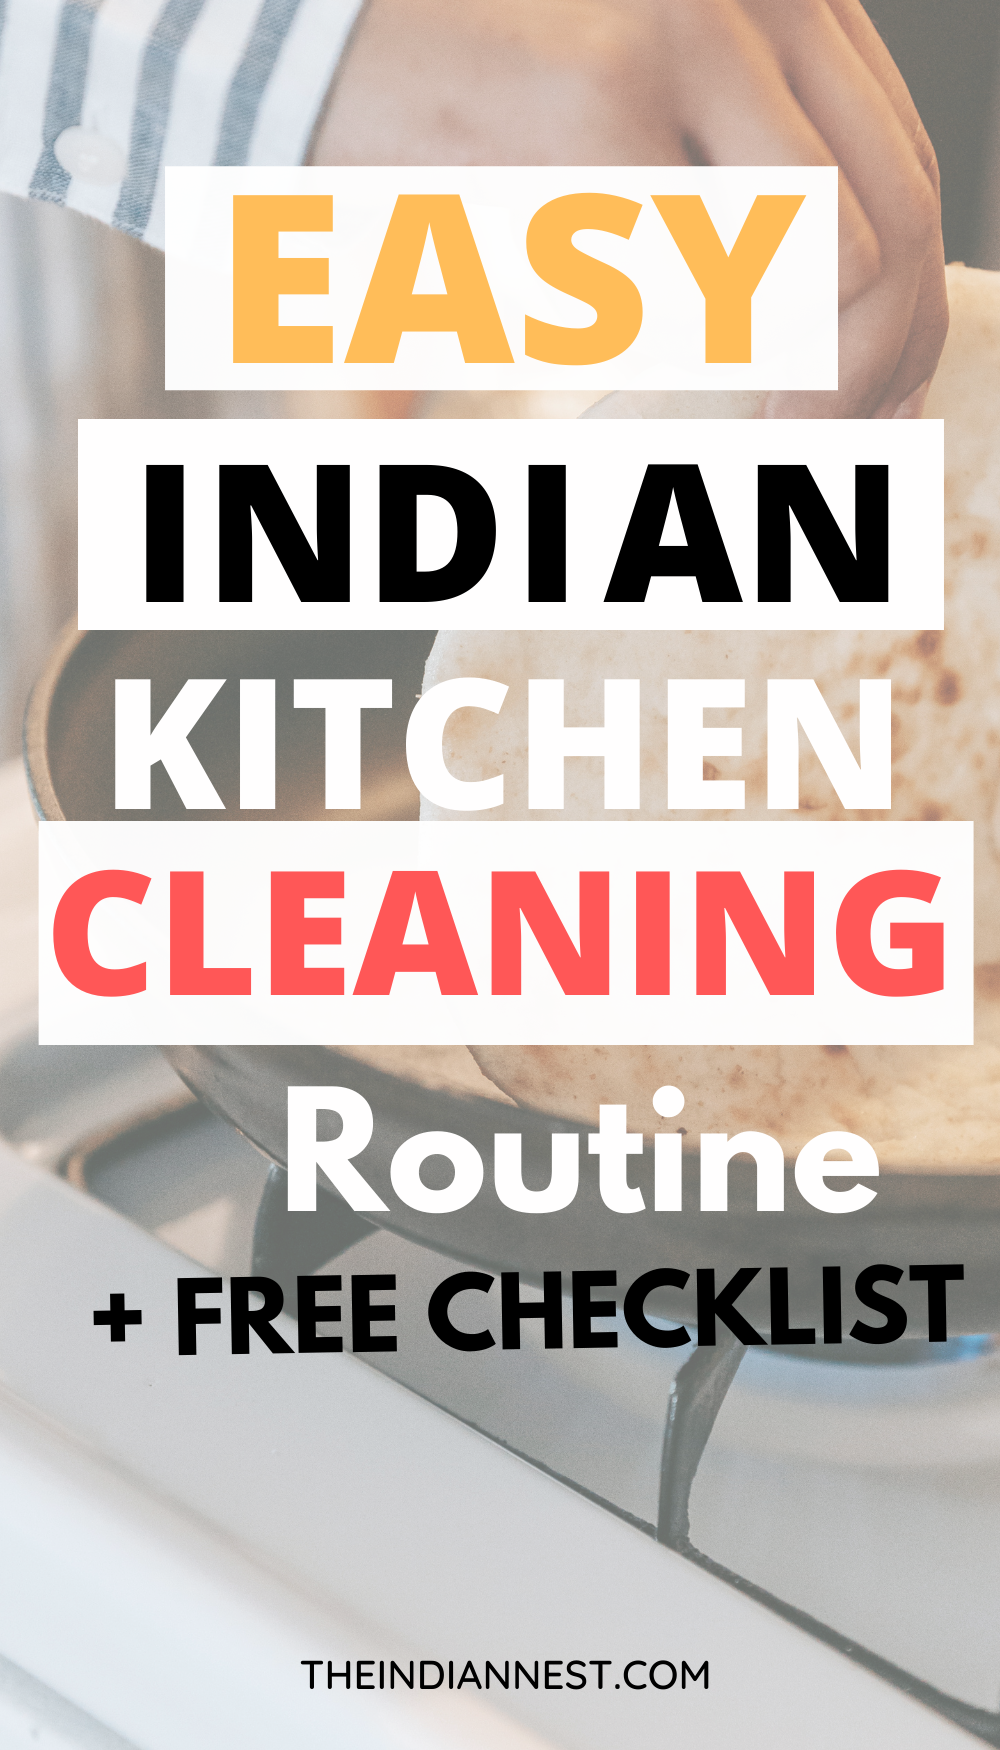 easy Indian kitchen cleaning routine